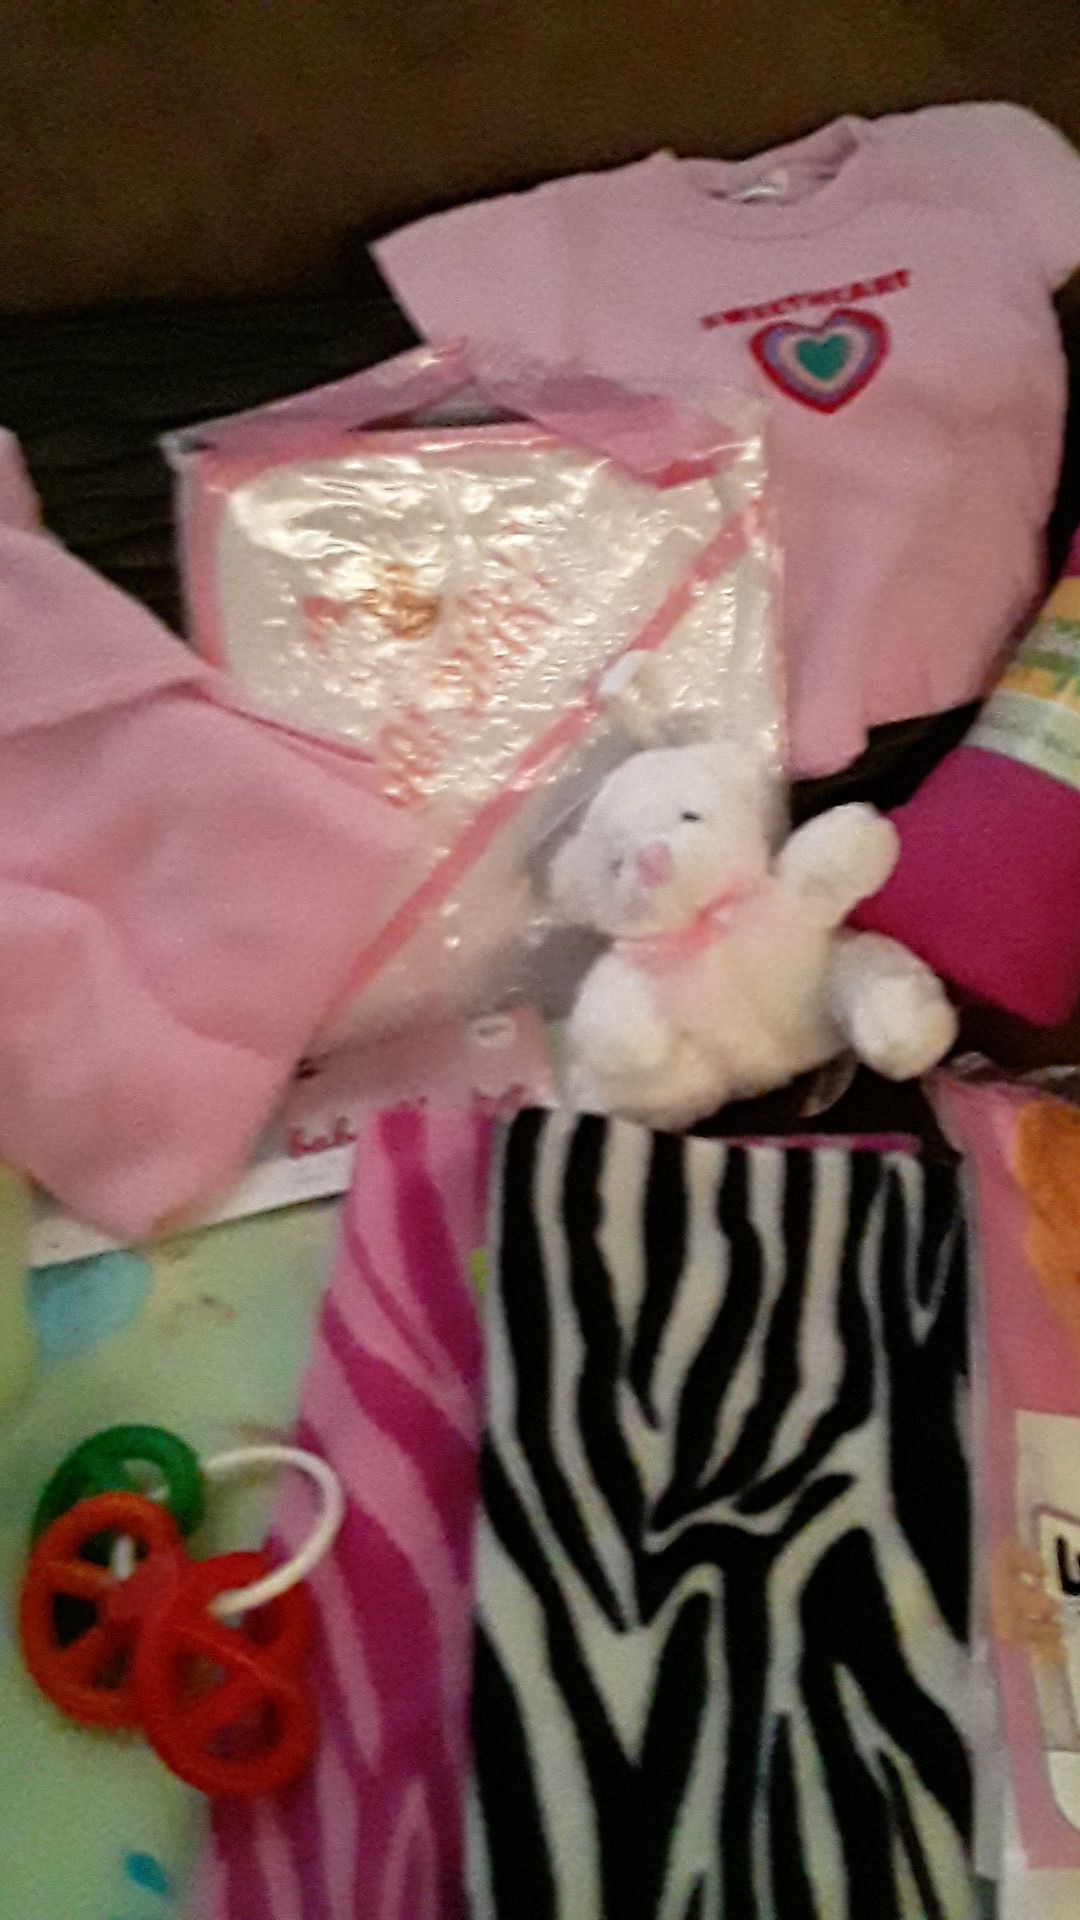 #4 Baby girl stuff three blankets disposable bibs an extra blanket or stuffed animal to towels and a T-shirt and a teething ring and a stuffed bear